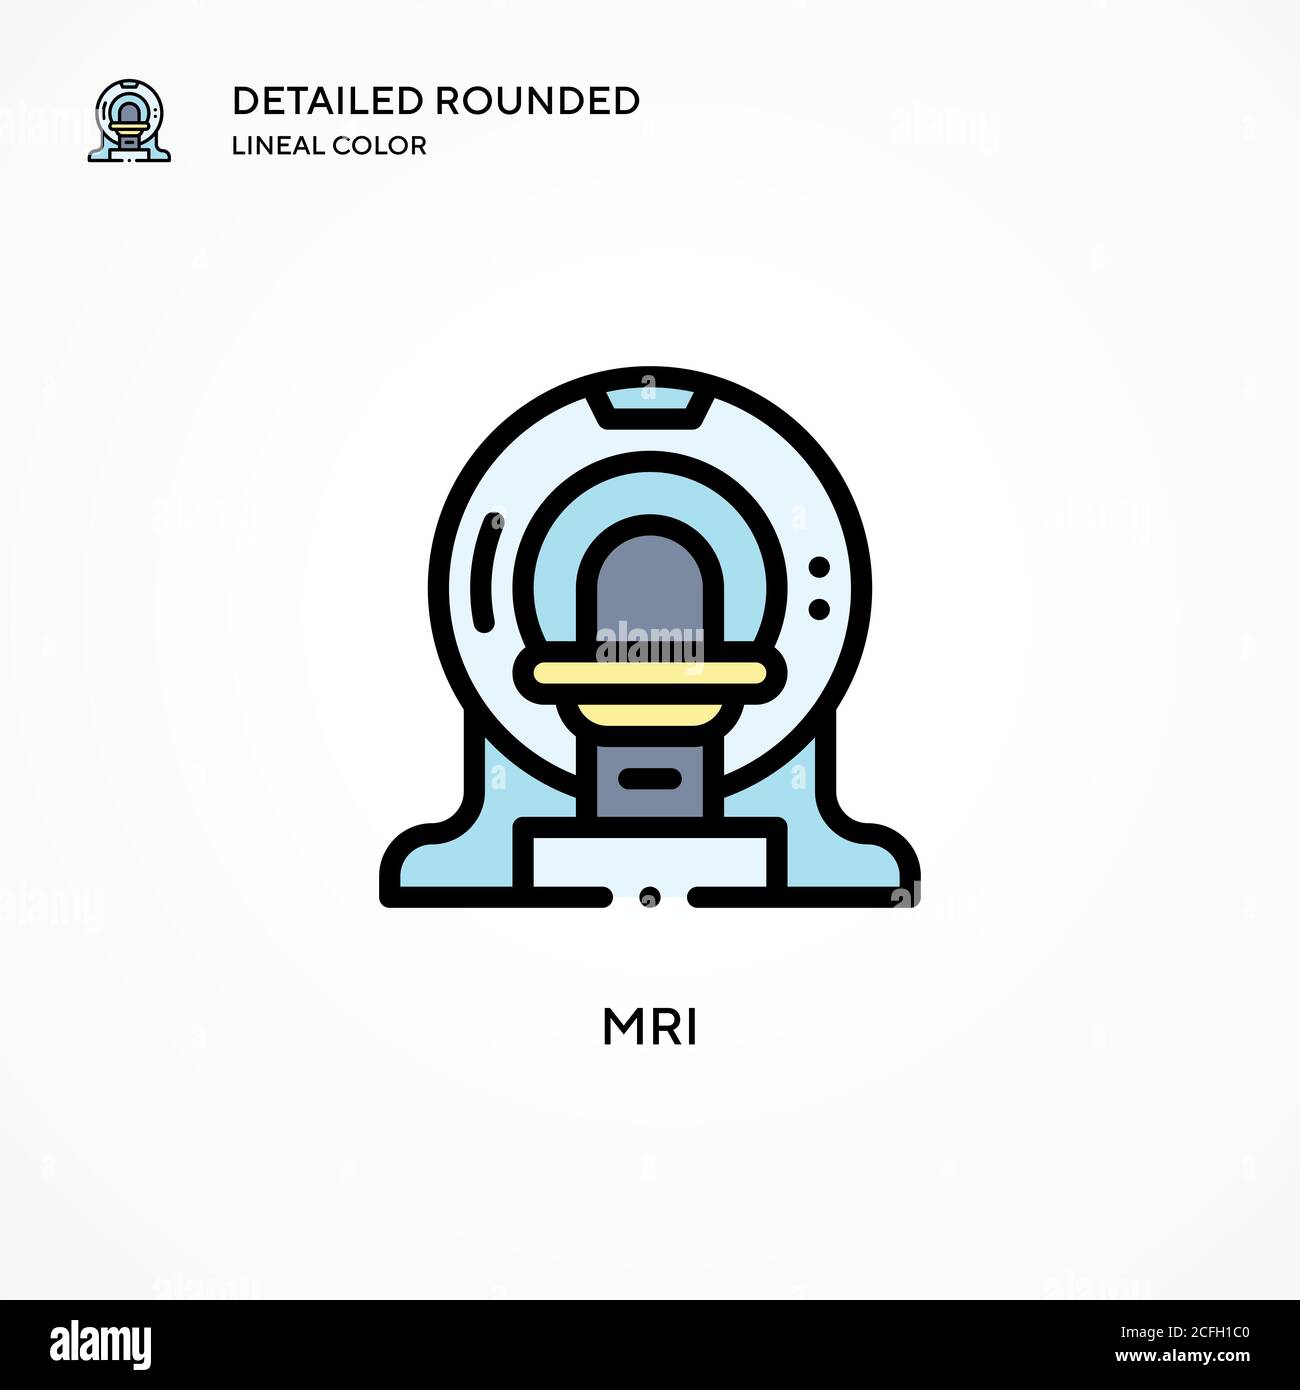 Mri vector icon. Modern vector illustration concepts. Easy to edit and customize. Stock Vector